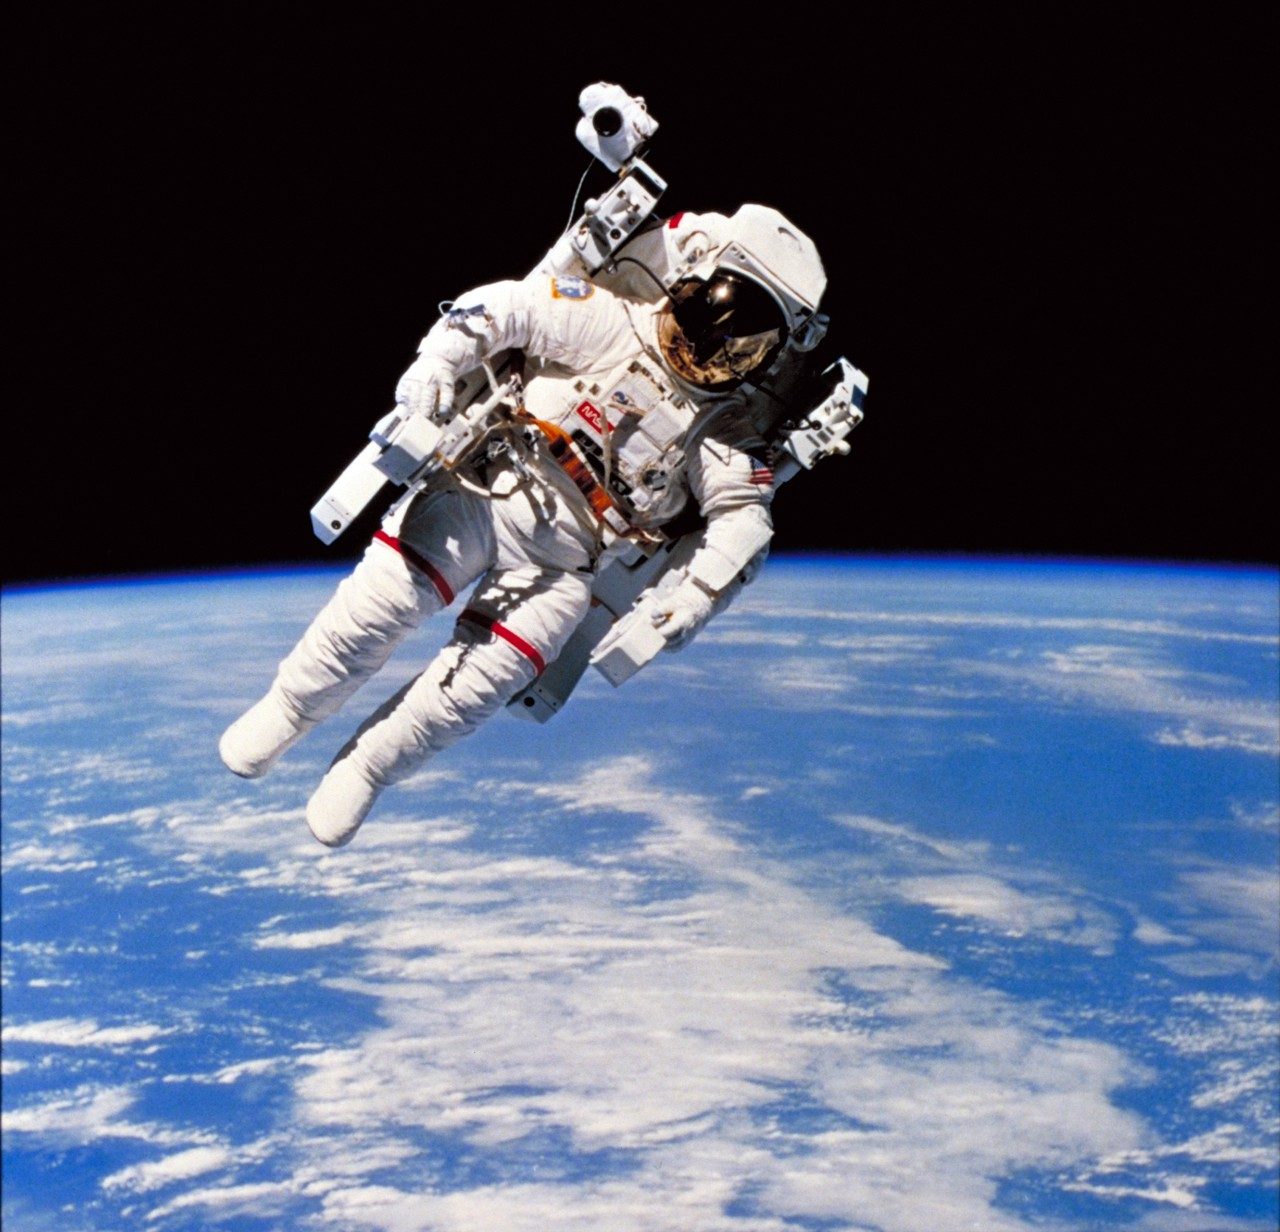 Manned Maneuvering Unit (MMU), a personal backpack propulsion system astronauts wear when working in orbit outside the Space Shuttle.